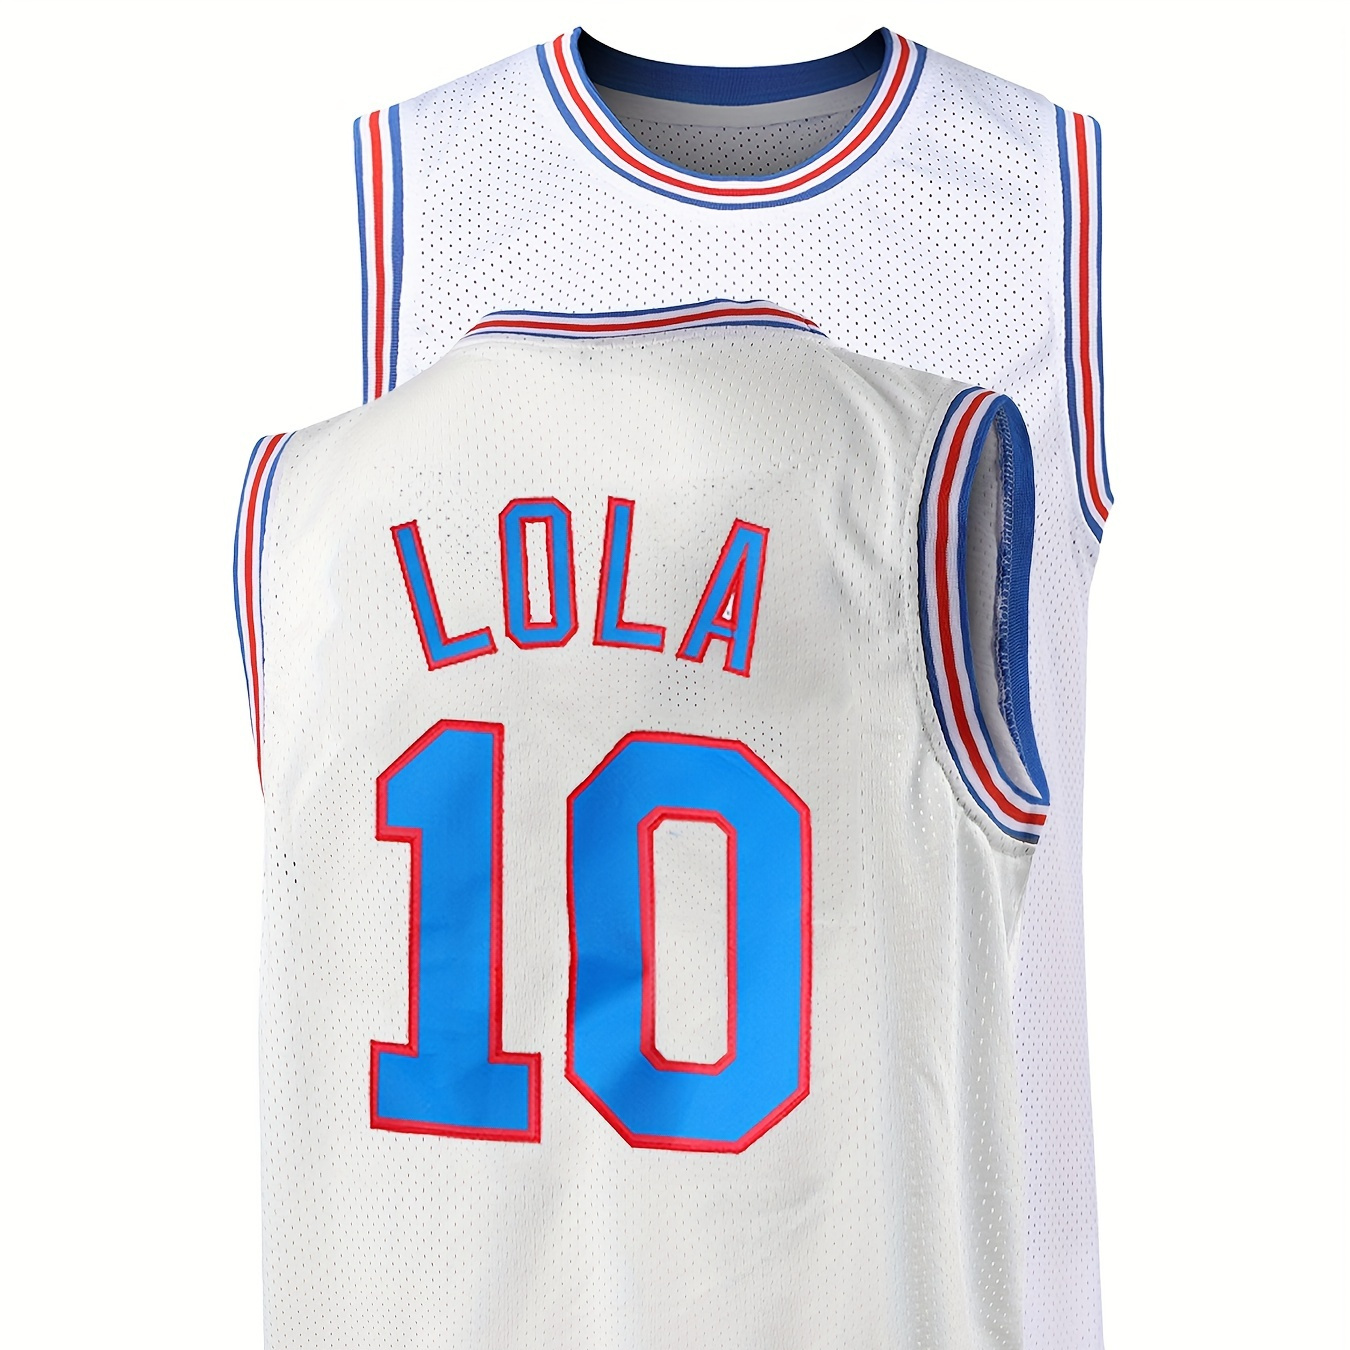 

Men's Basketball # 10 Lola Classic Vintage Embroidery Sweat-absorbing Breathable Sleeveless Jersey